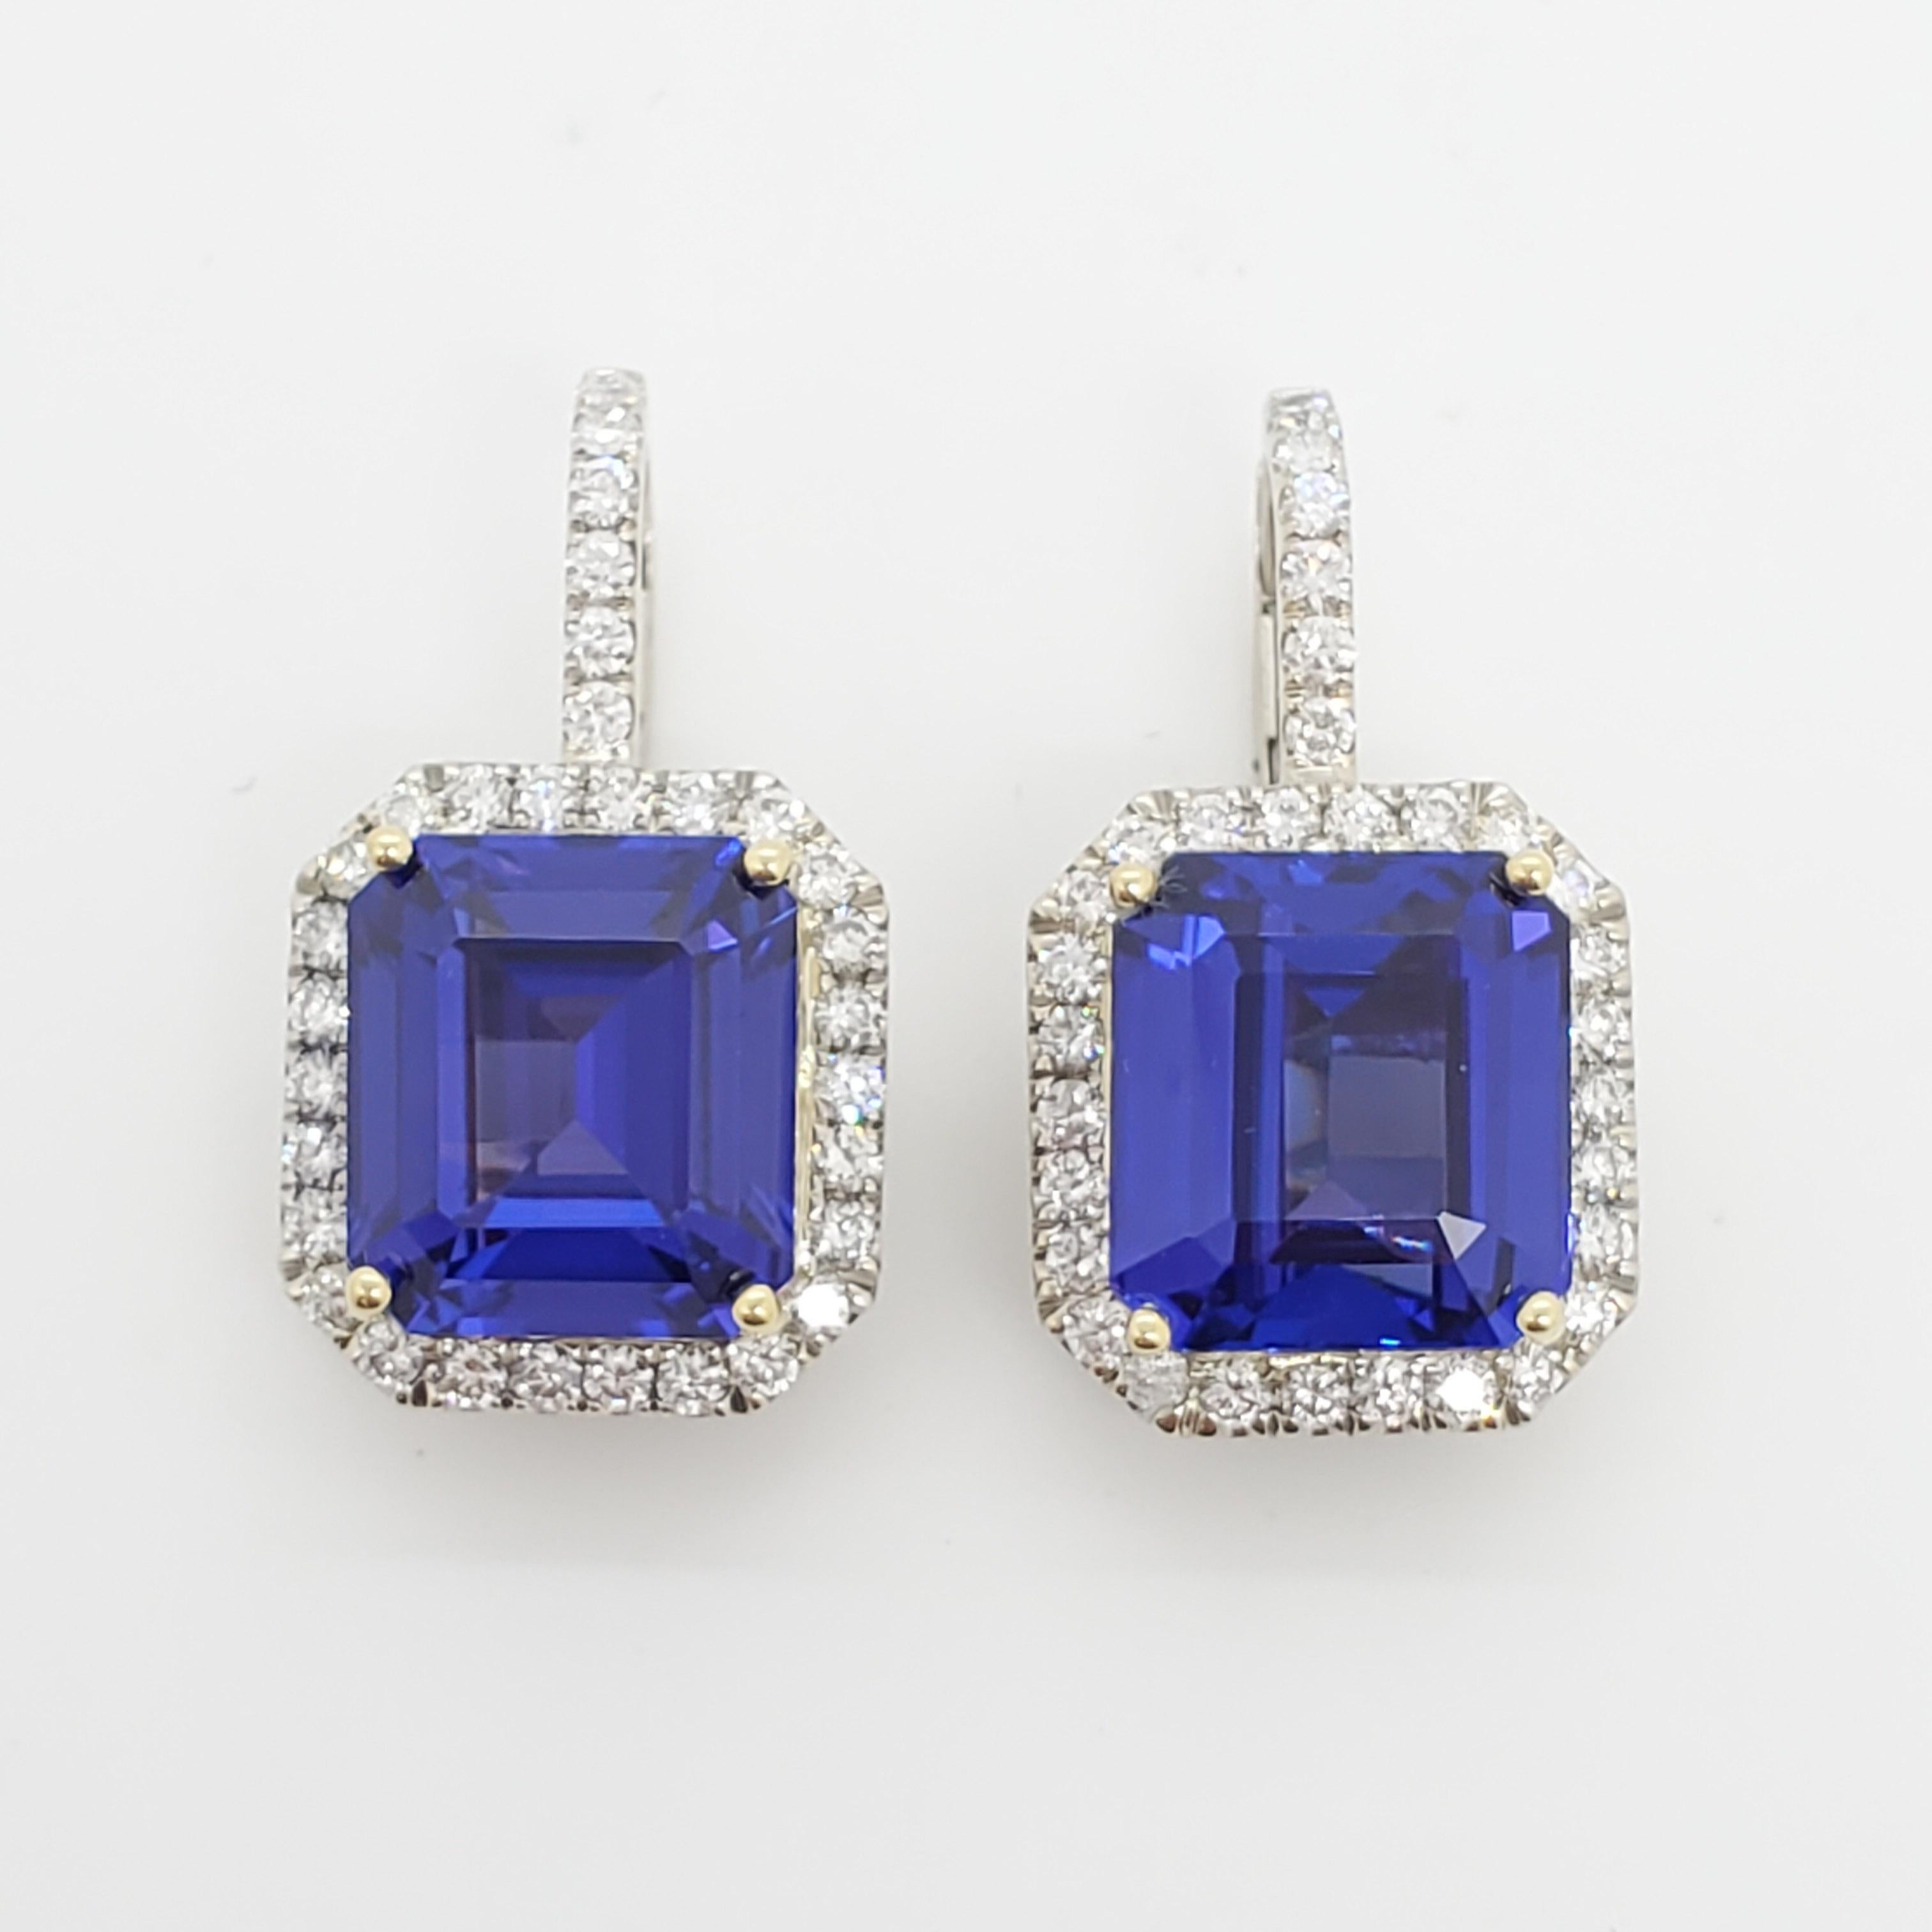 Absolutely stunning 19.50 ct. tanzanite octagons with 1.50 ct. good quality, white, and bright diamond rounds.  Handmade in 18k yellow and white gold.  These earrings are showstoppers!